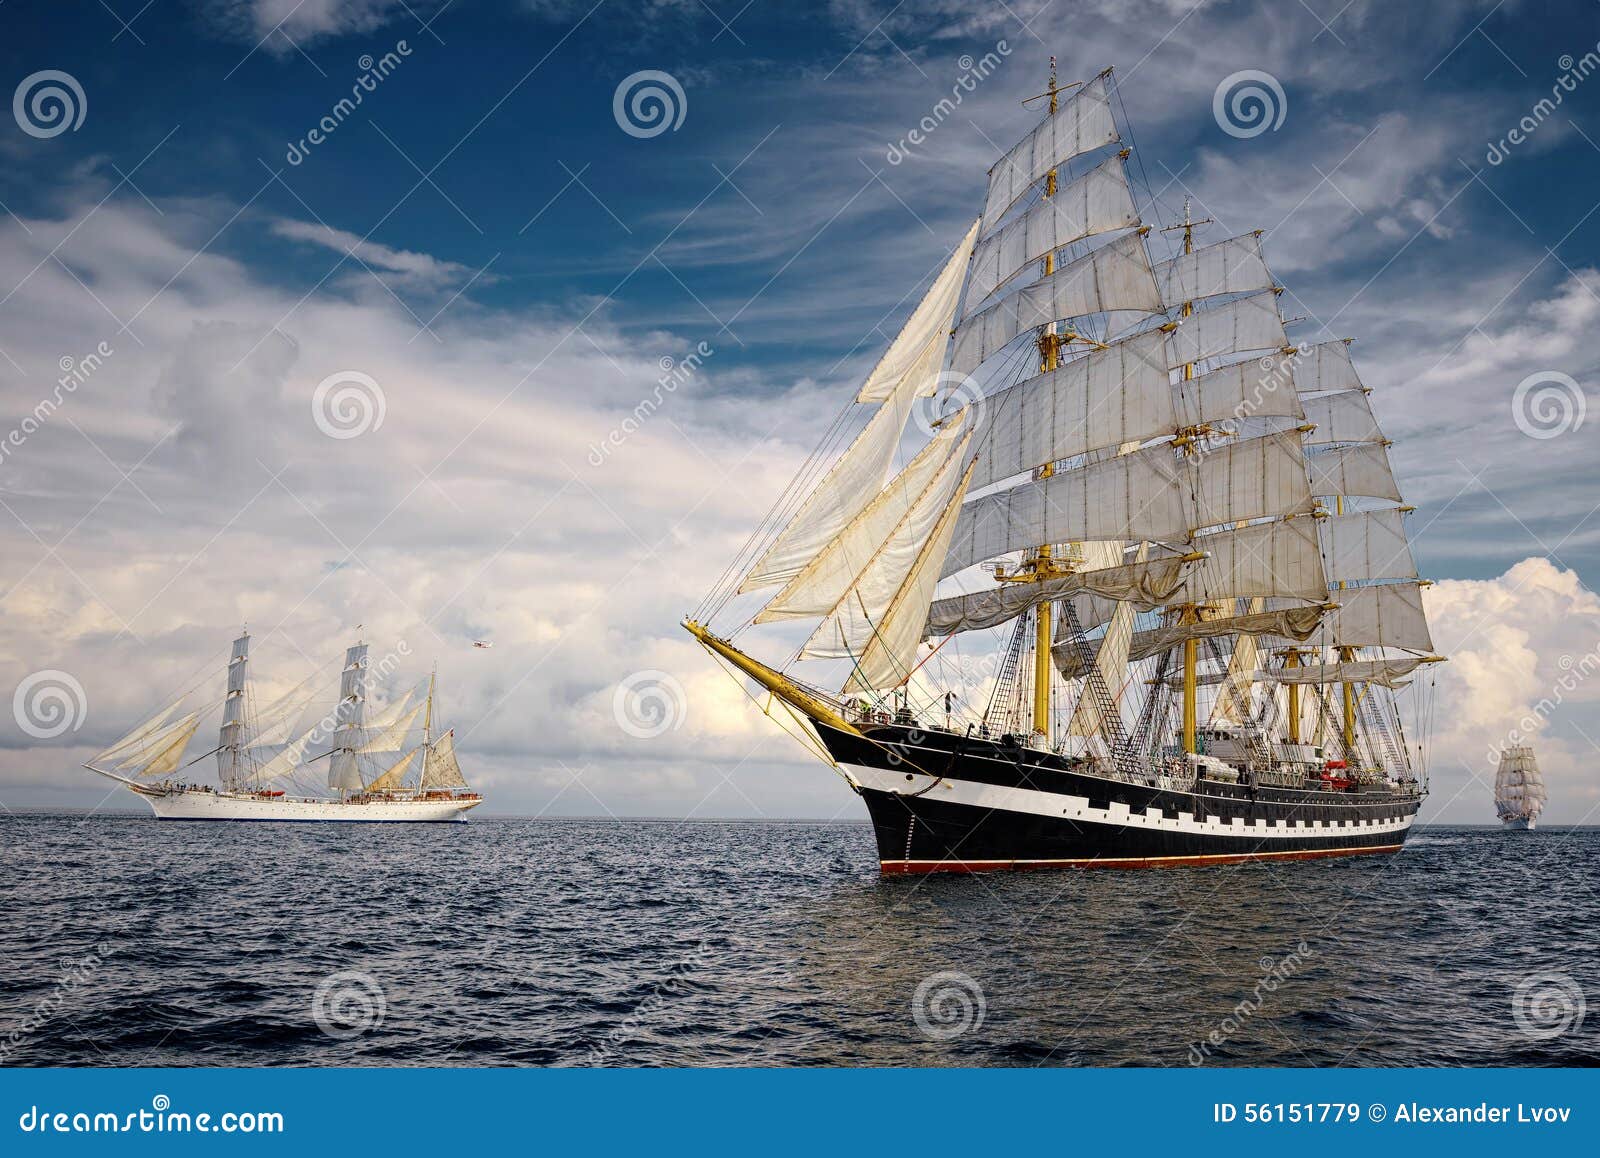 sailing ships on the background of a very beautiful sky. sailing. luxury yacht.